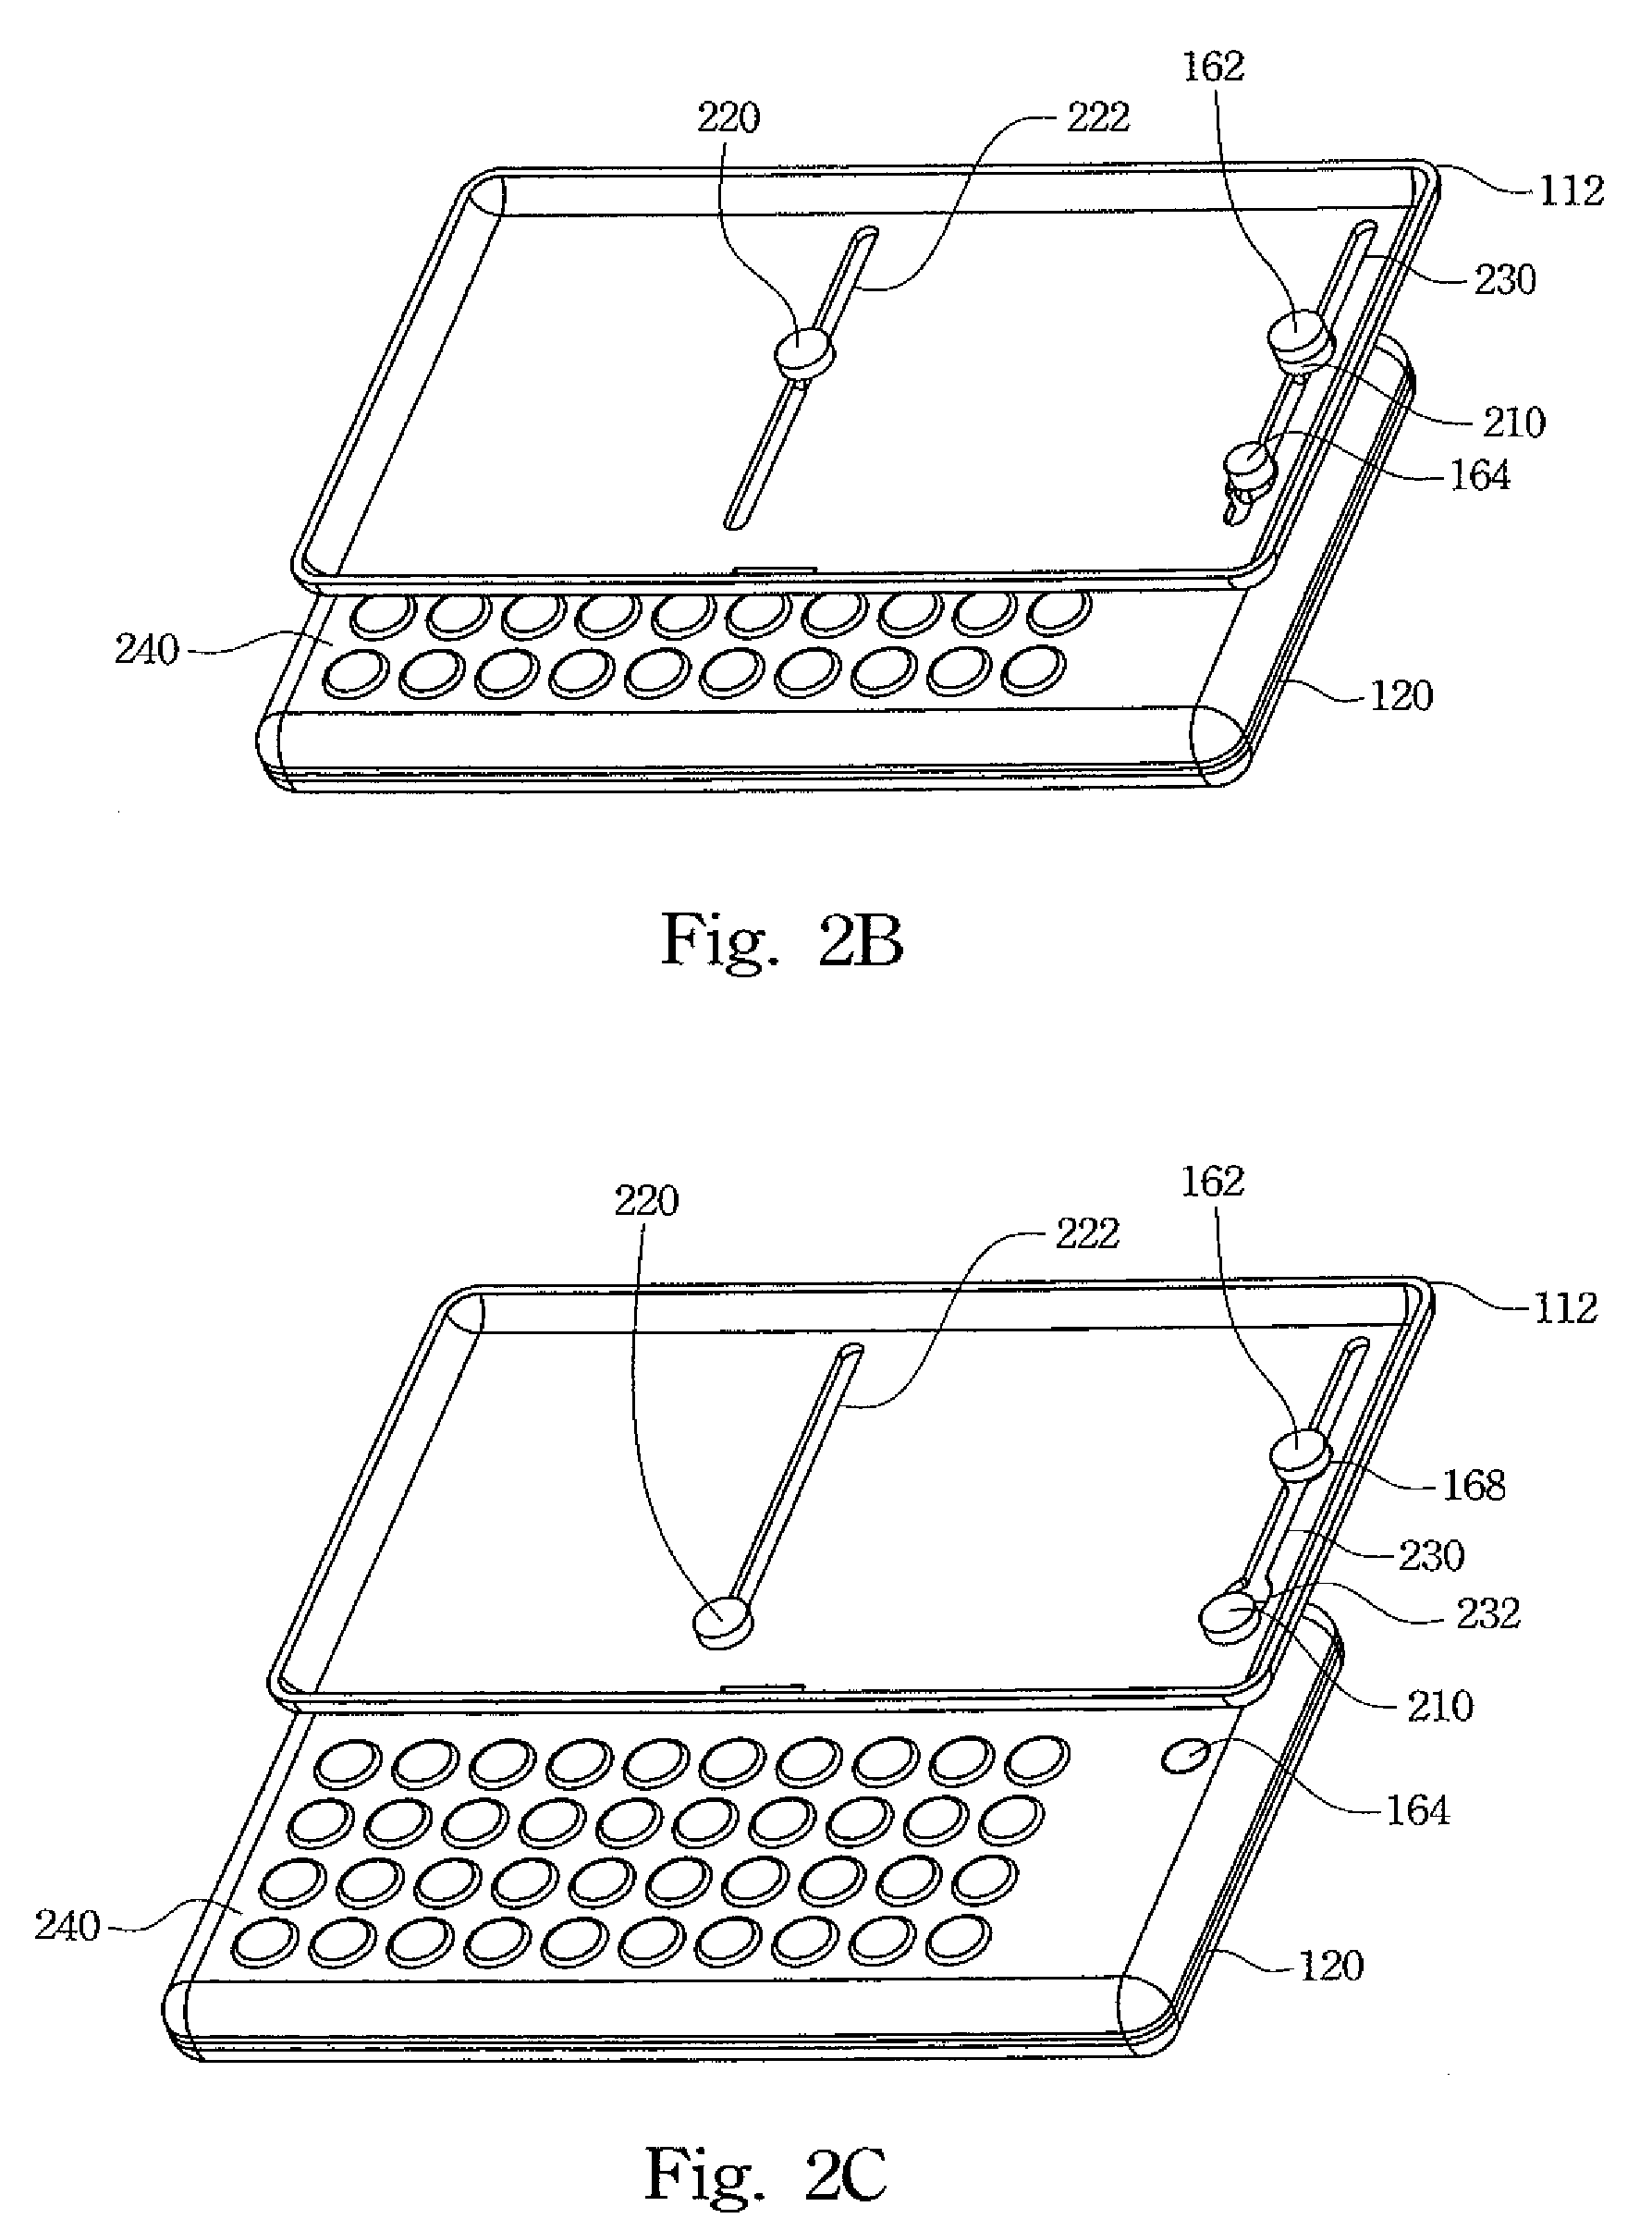 Dynamic sliding module and uses thereof